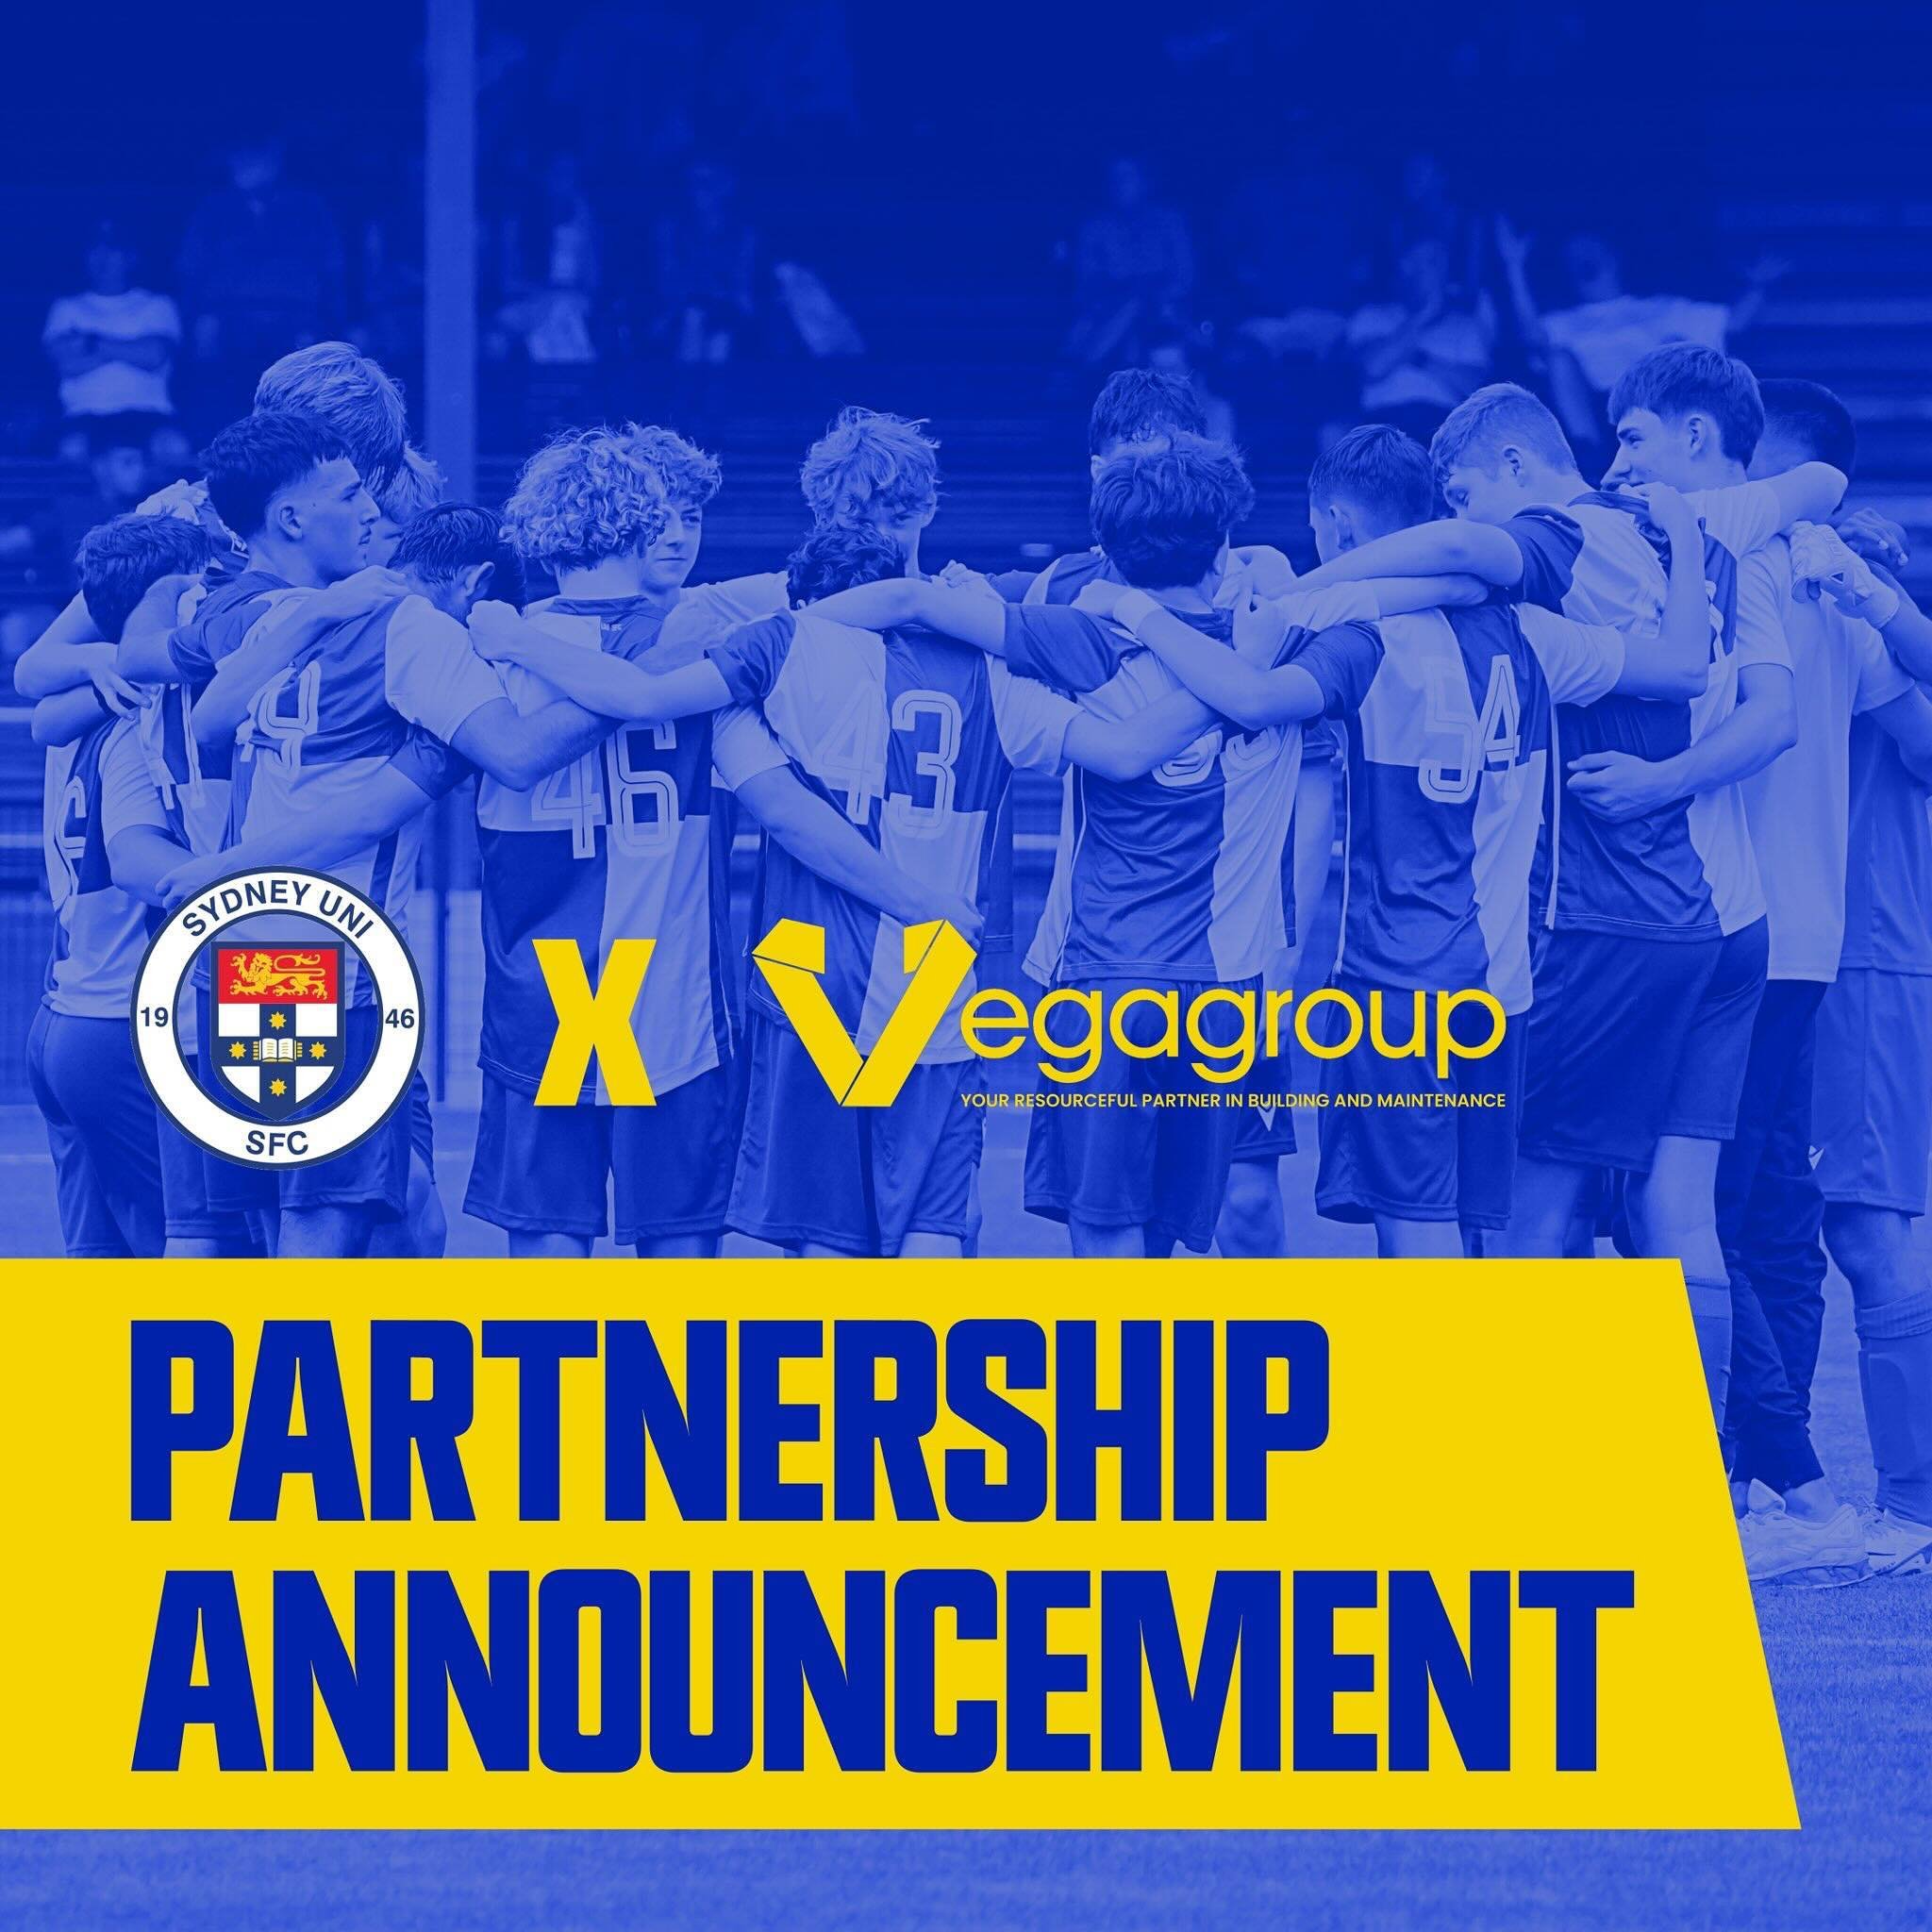 PARTNERSHIP ANNOUNCEMENT | 
Vegagroup is excited to announce our partnership with Sydney University Soccer and Football Club (SUSFC) marking a significant milestone in our ongoing commitment to community engagement and excellence.
Since our founding